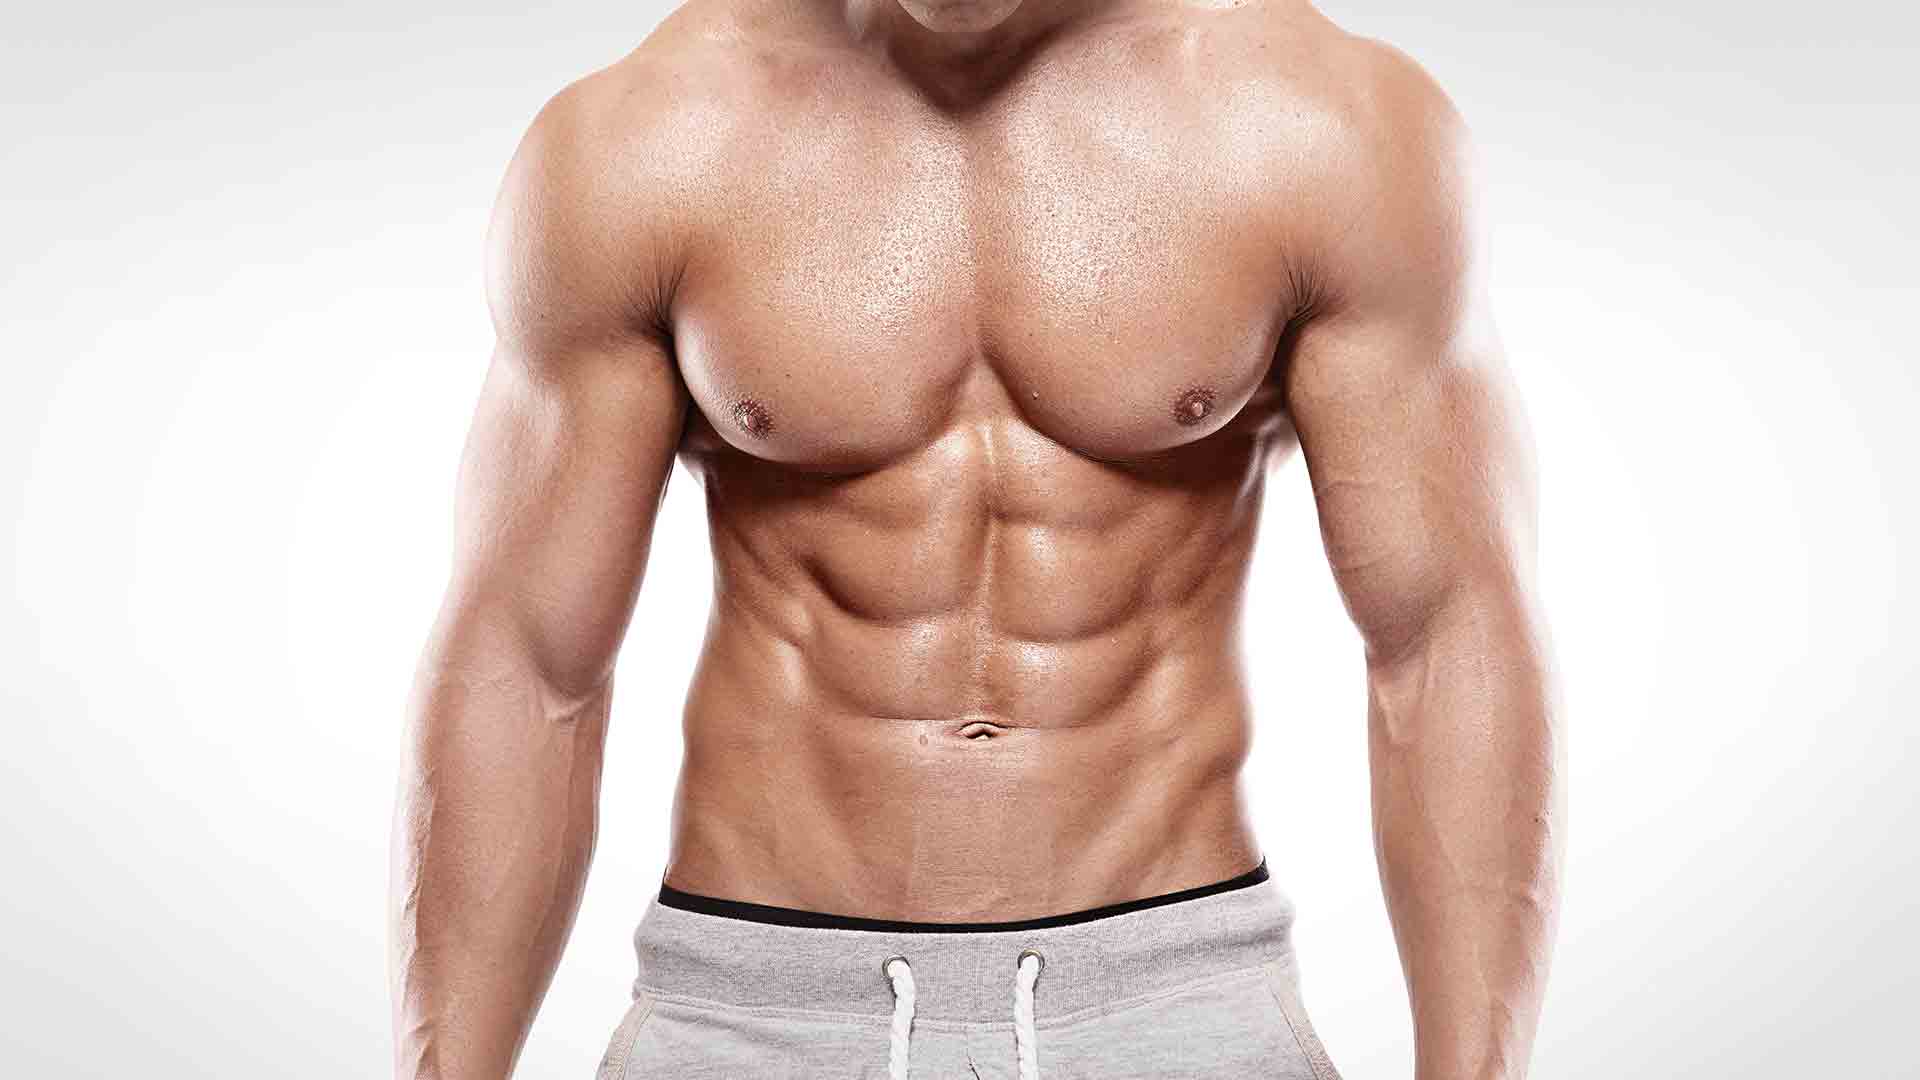 How to Get Six Pack Abs With Workout & Diet.